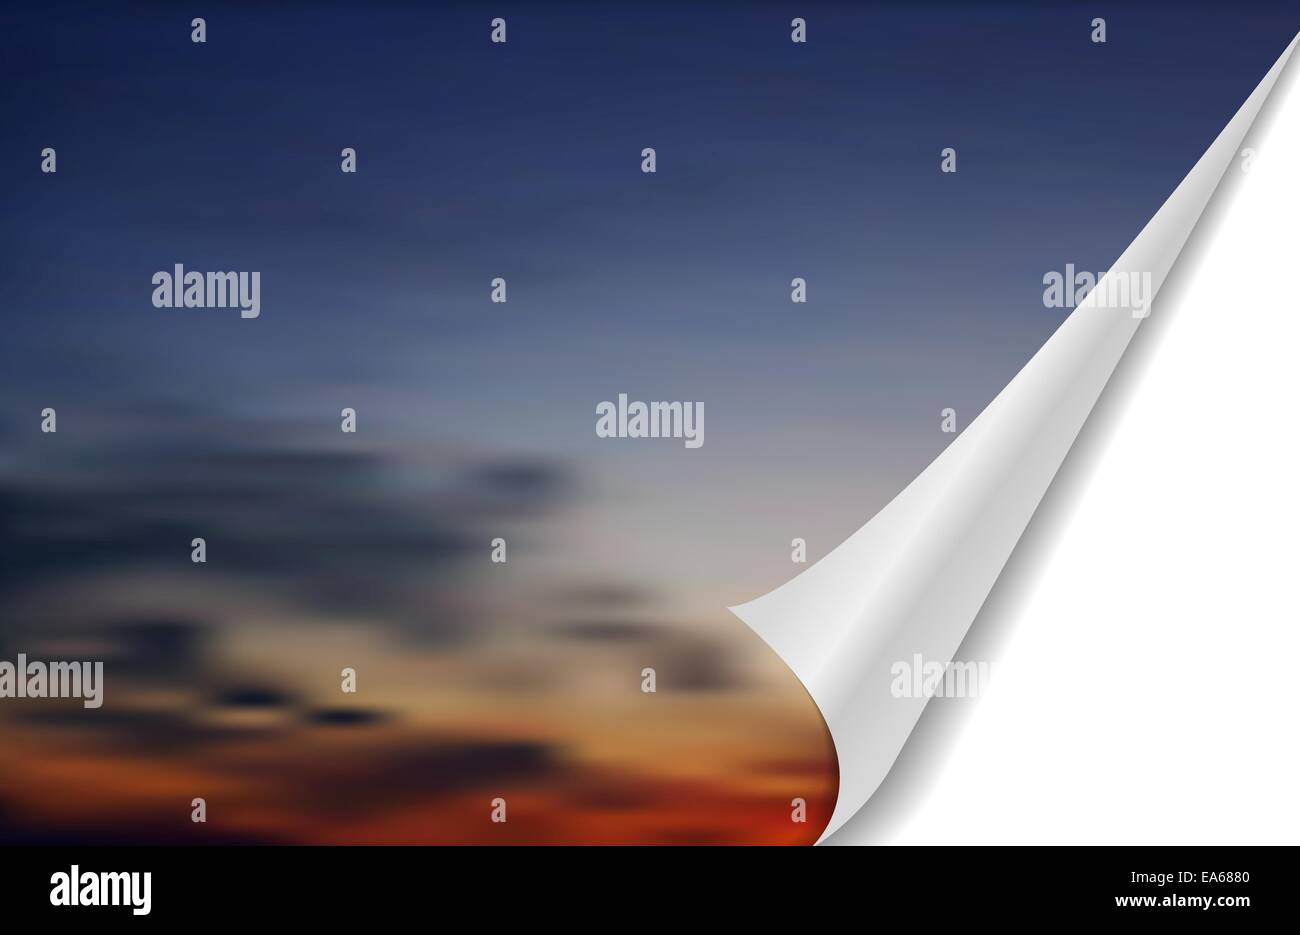 Abstract cloudscape with folded edge Stock Photo